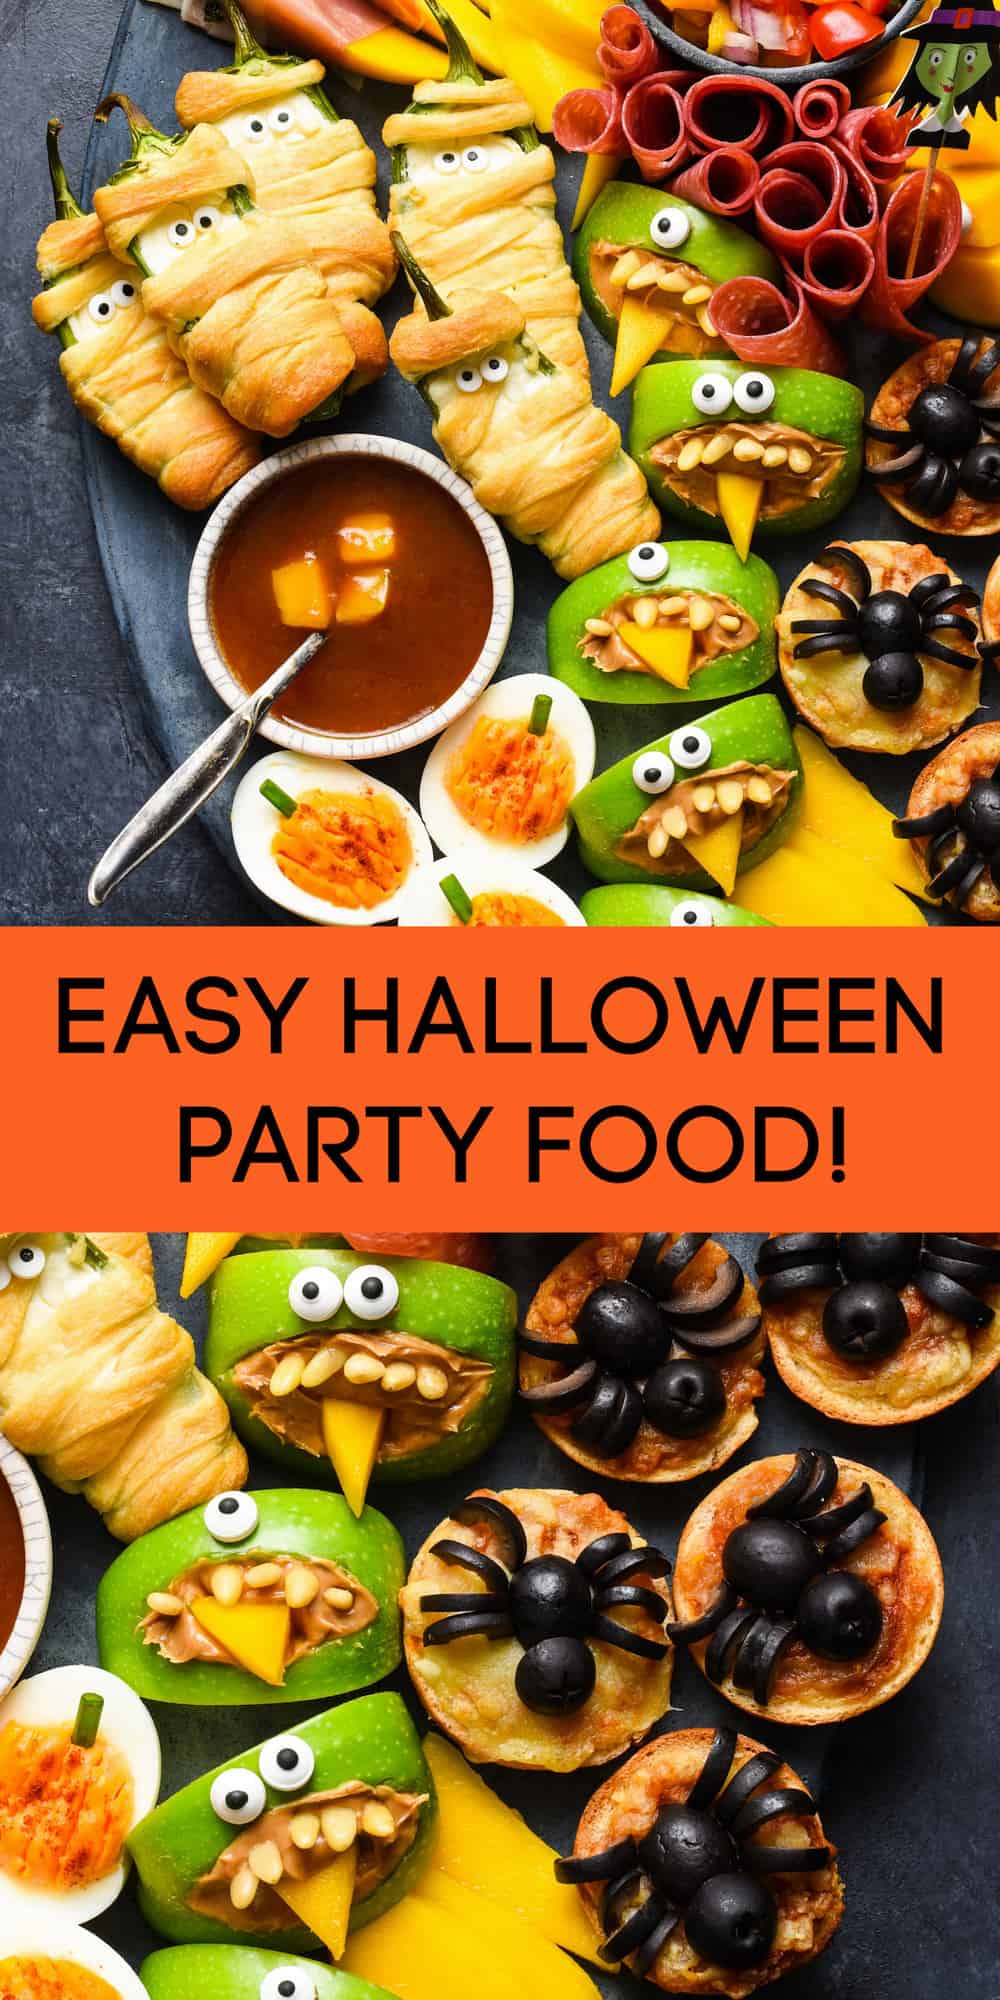 Collage of spooky Halloween food with overlay: EASY HALLOWEEN PARTY FOOD!